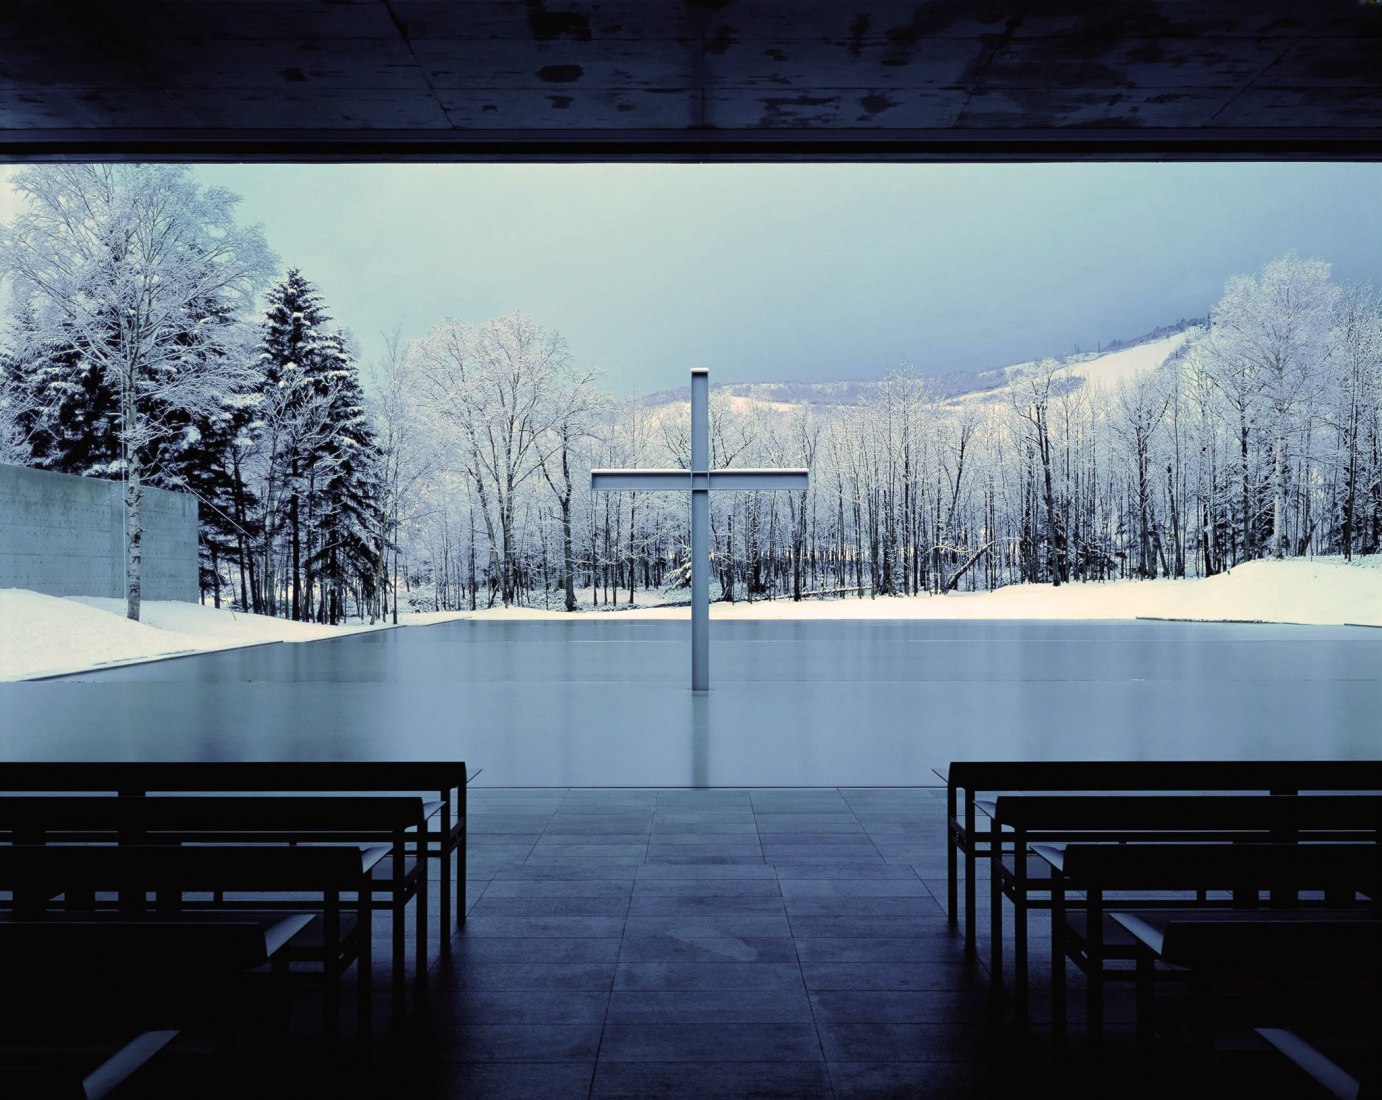 Church on the Water by Tadao Ando (1988). Photograph by Yoshio Shiratori. Image courtesy of The National Art Center Tokyo.